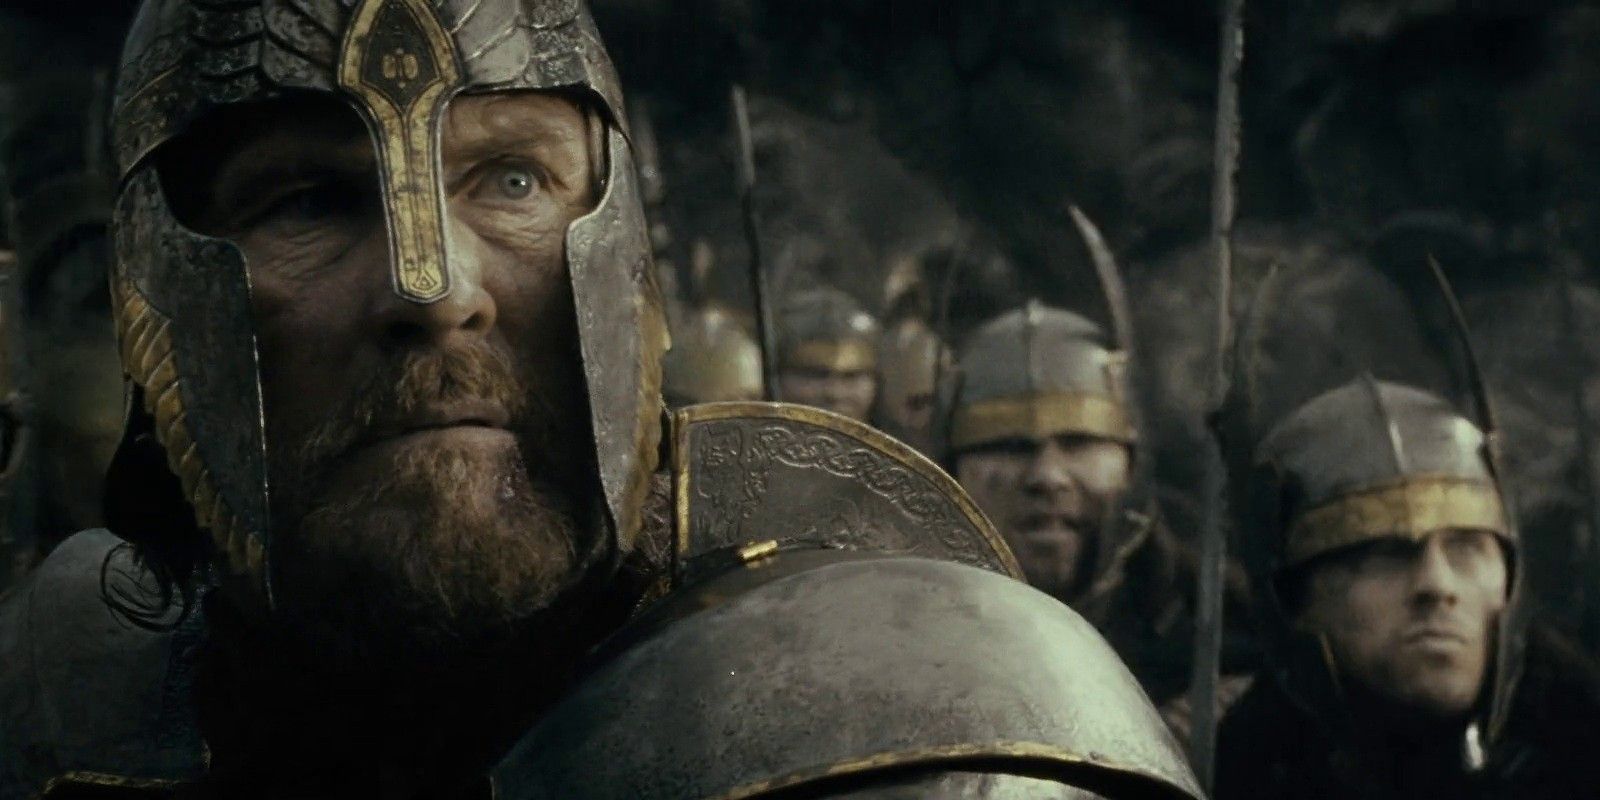 Peter McKenzie as Elendil in The Lord of the Rings The Fellowship of the Ring